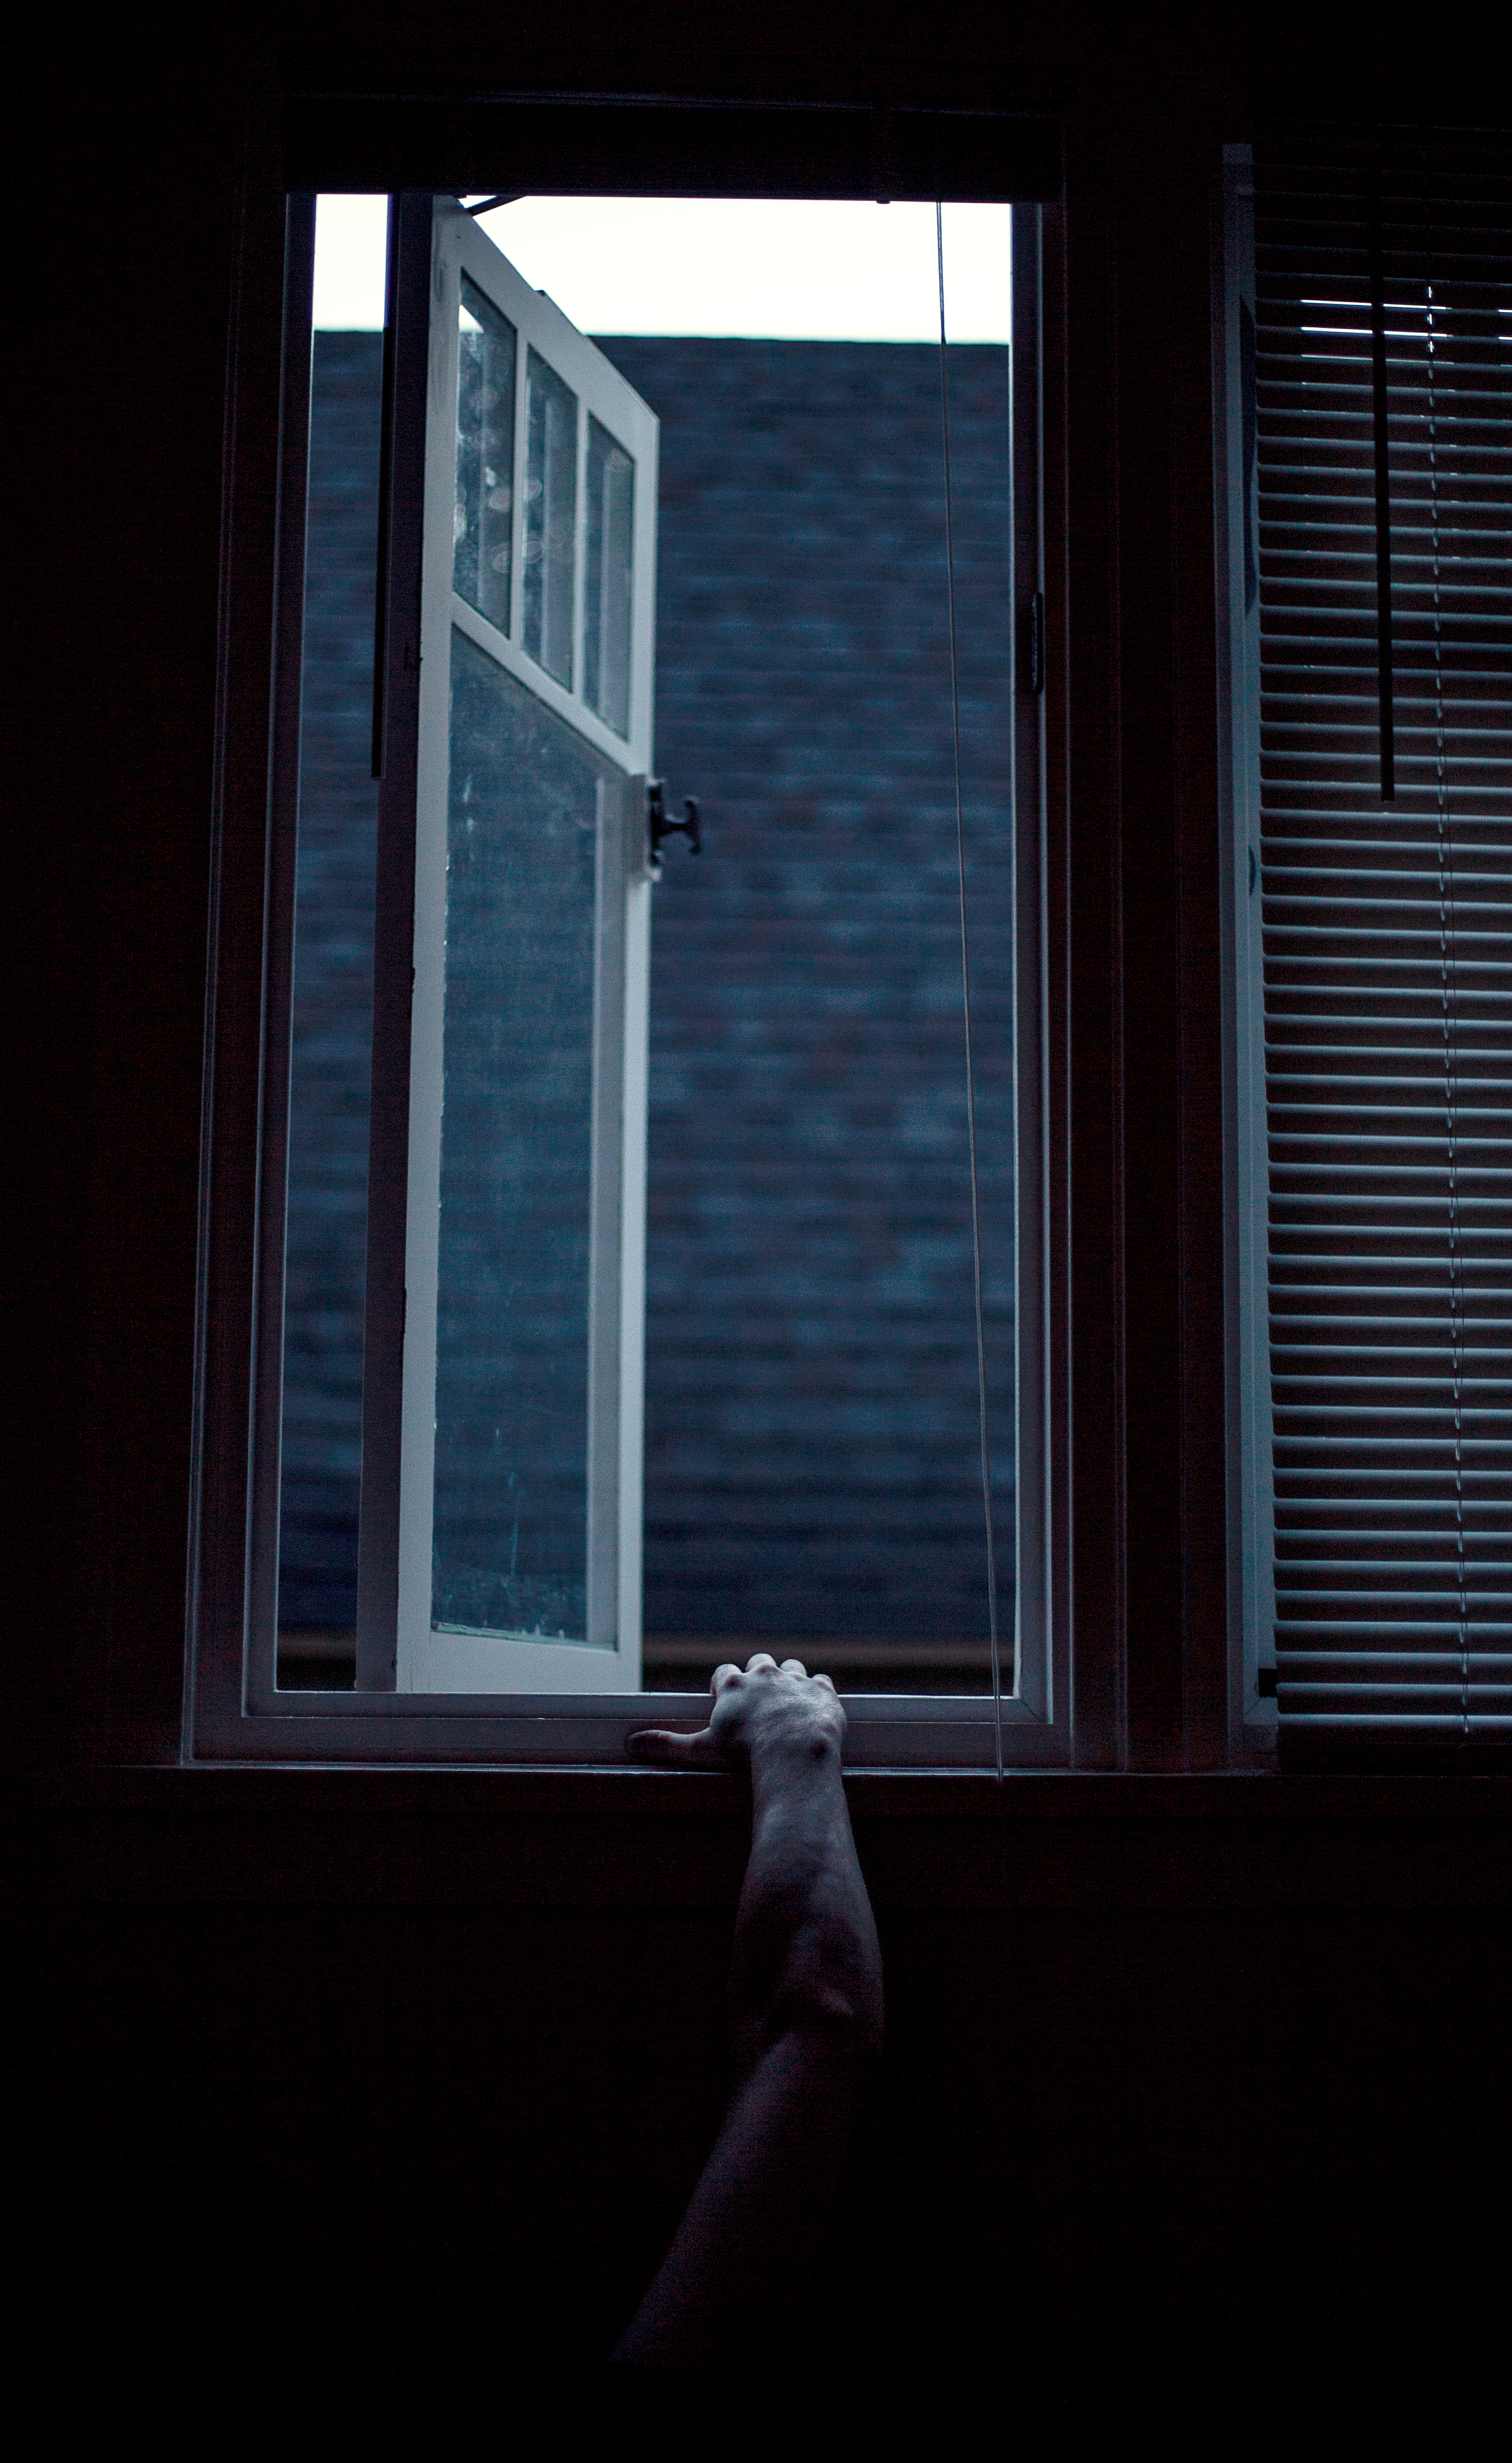 man's hand reaching up to clutch window ledge from darkness below - photo by Laurence Boswell of Only Human Photography